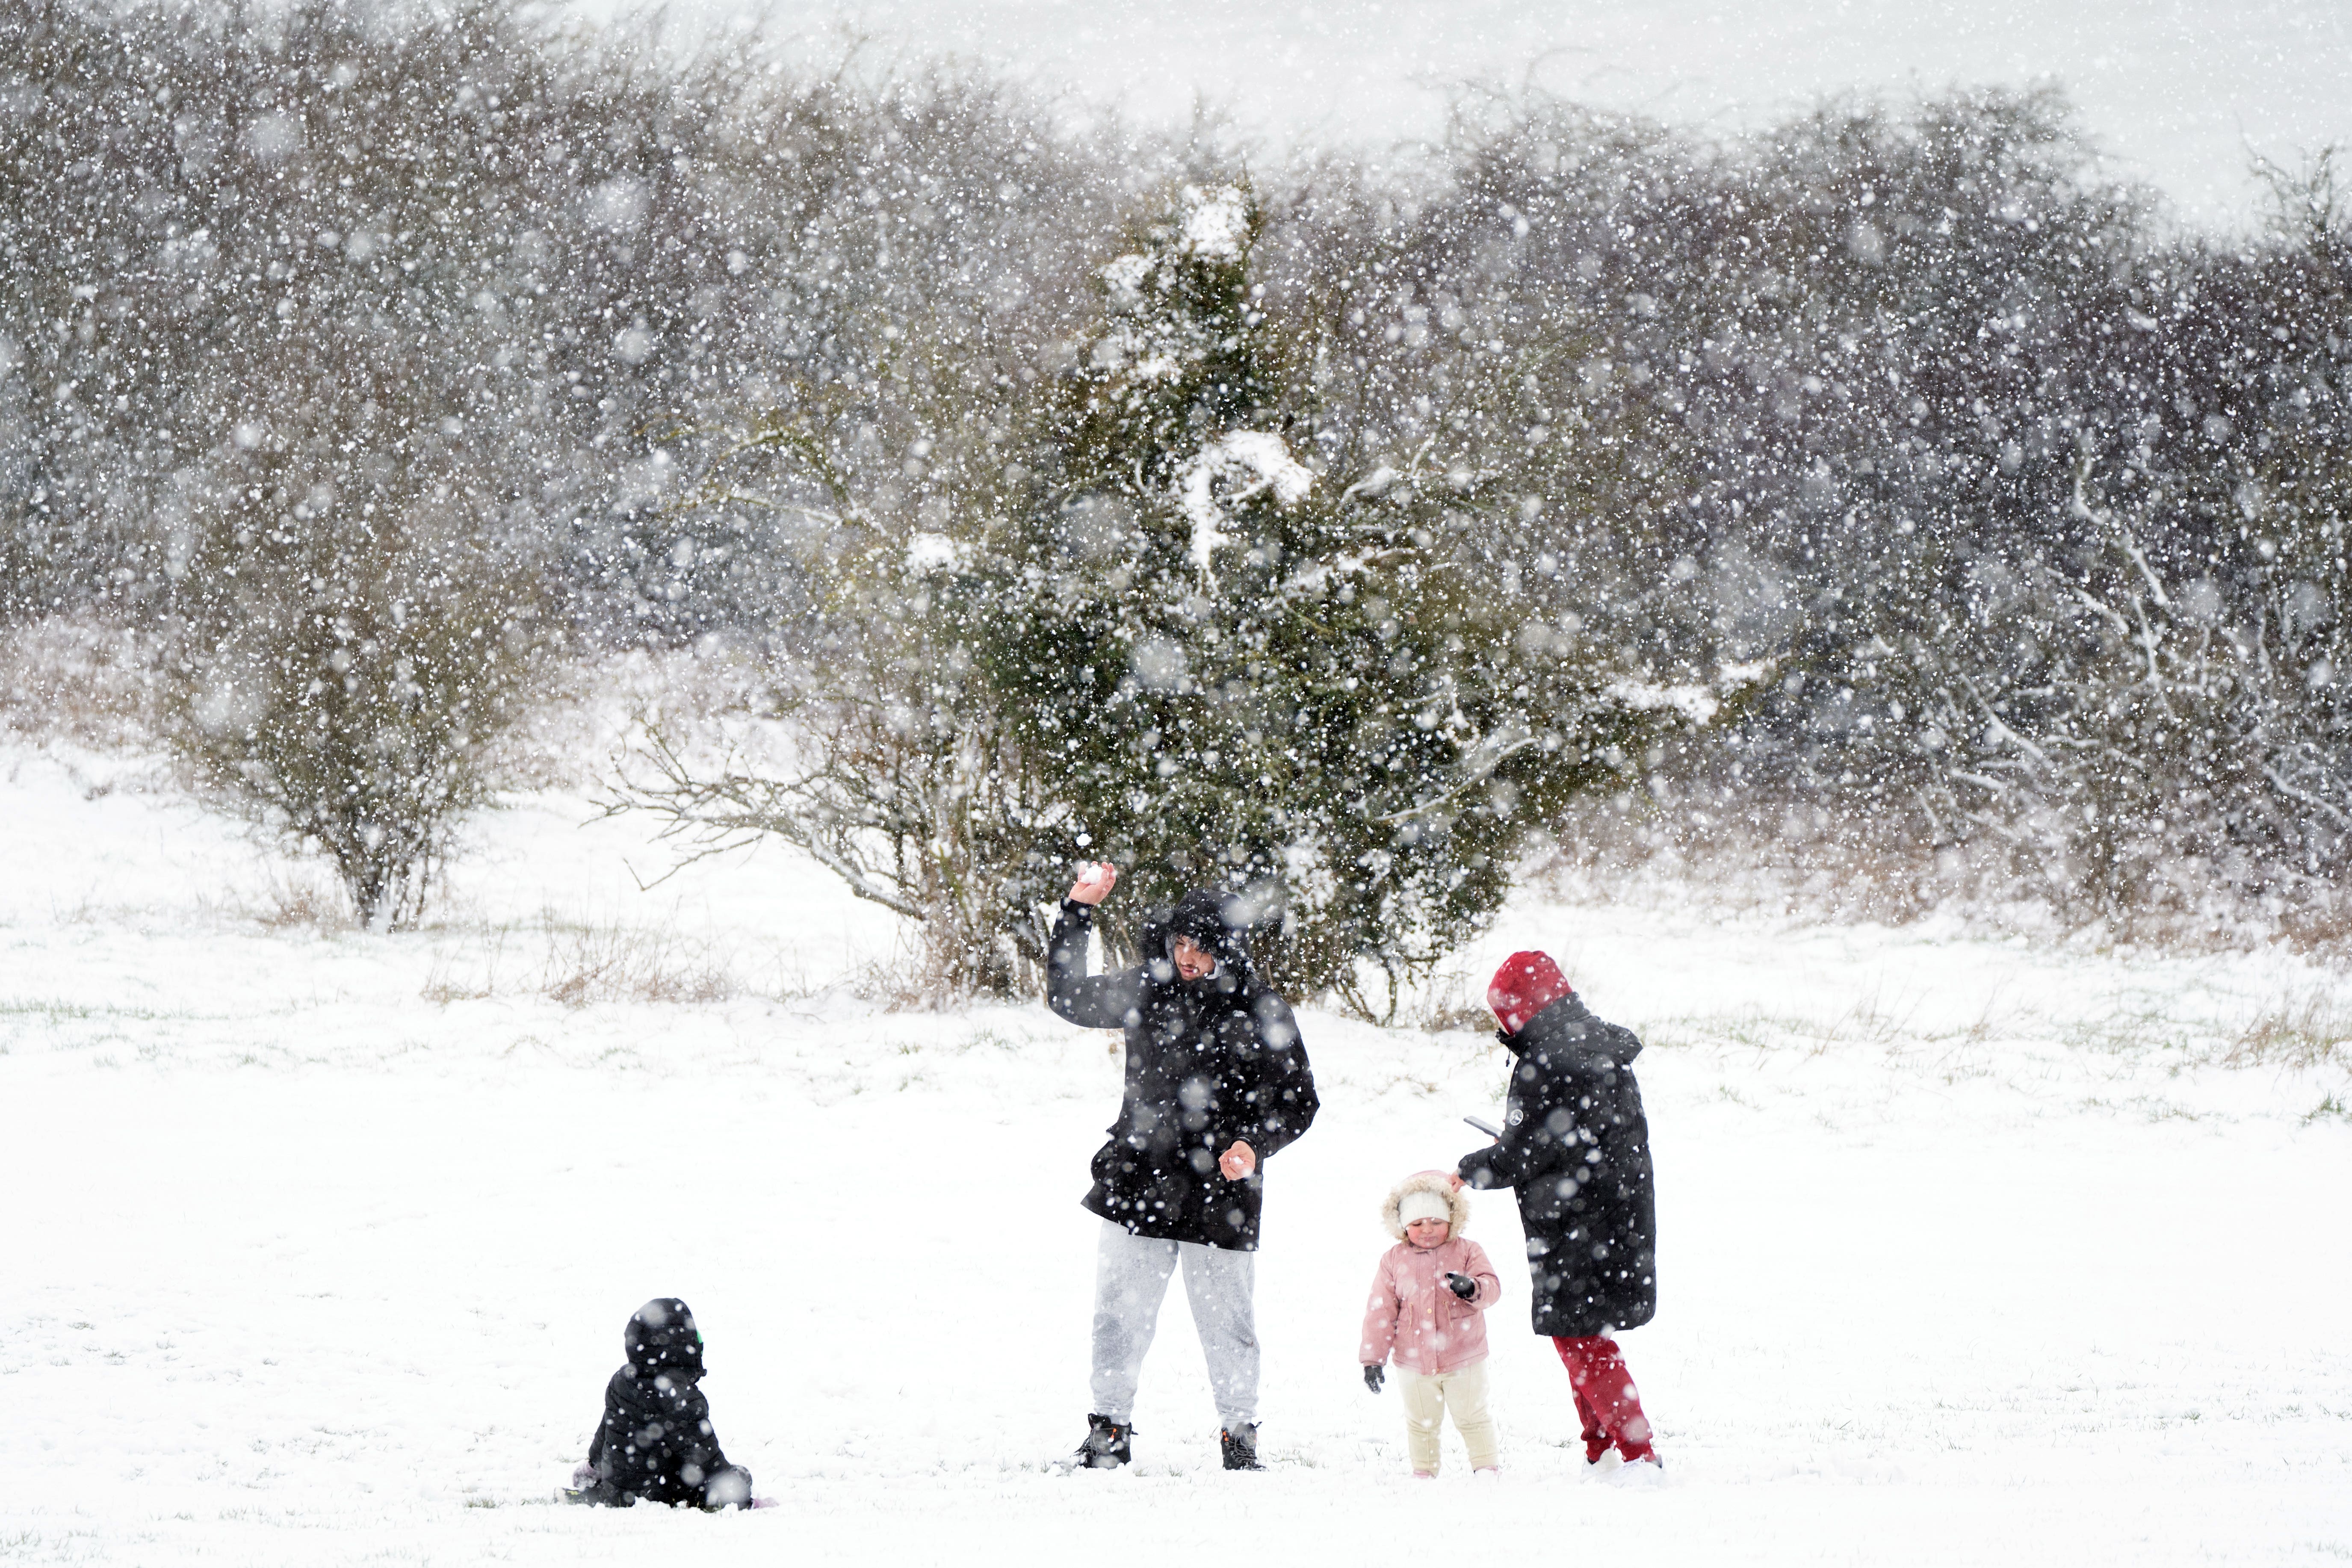 The Met Office has issued an amber warning for ‘strong winds bringing blizzard conditions’ (PA)